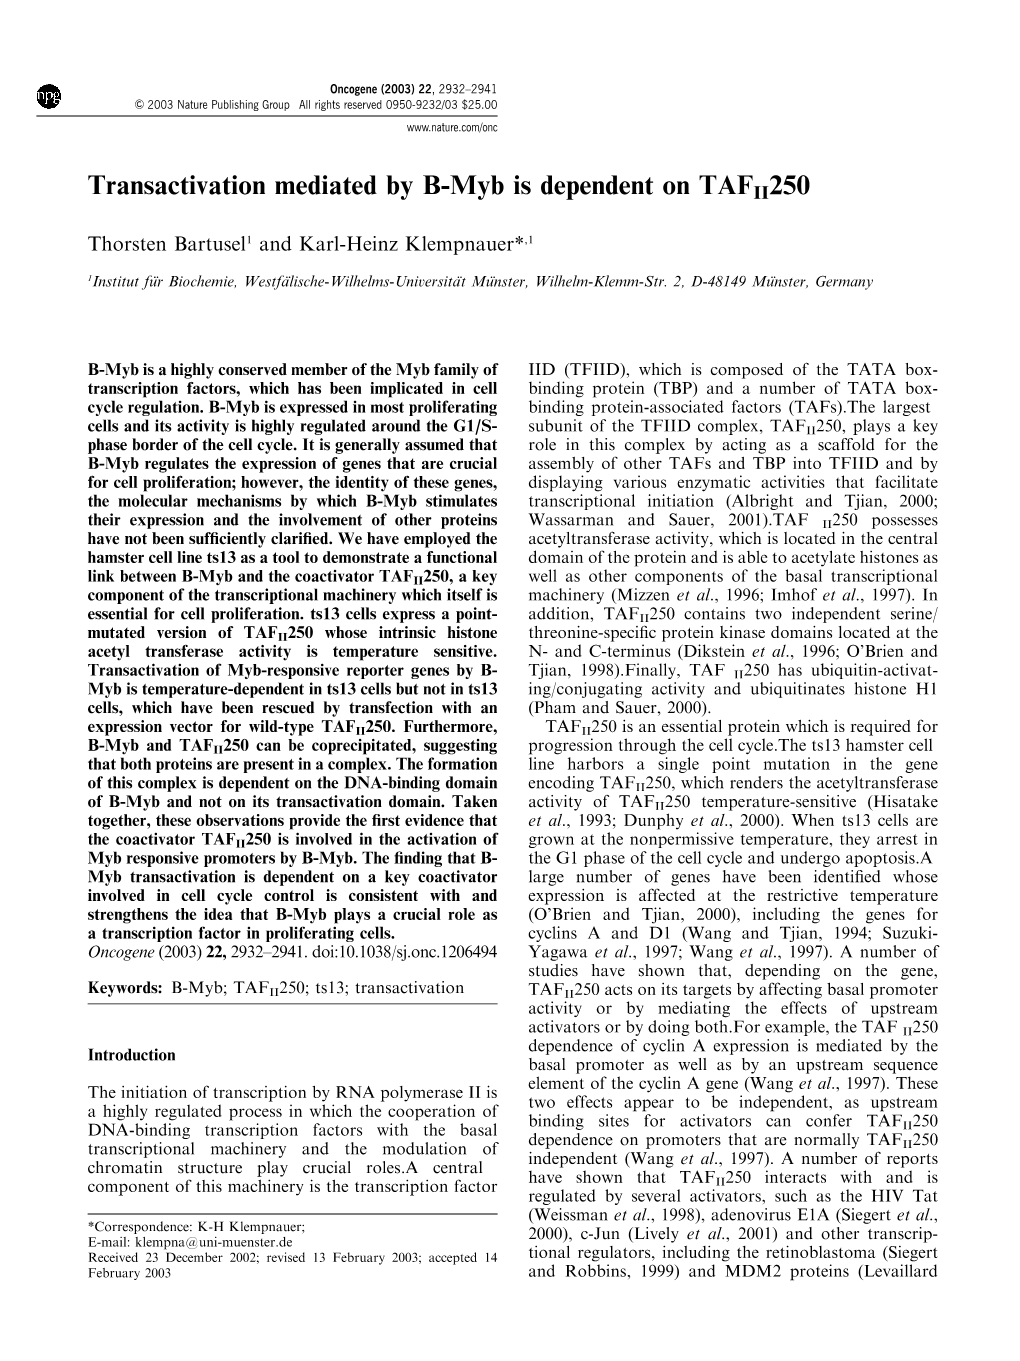 Transactivation Mediated by B-Myb Is Dependent on TAFII250